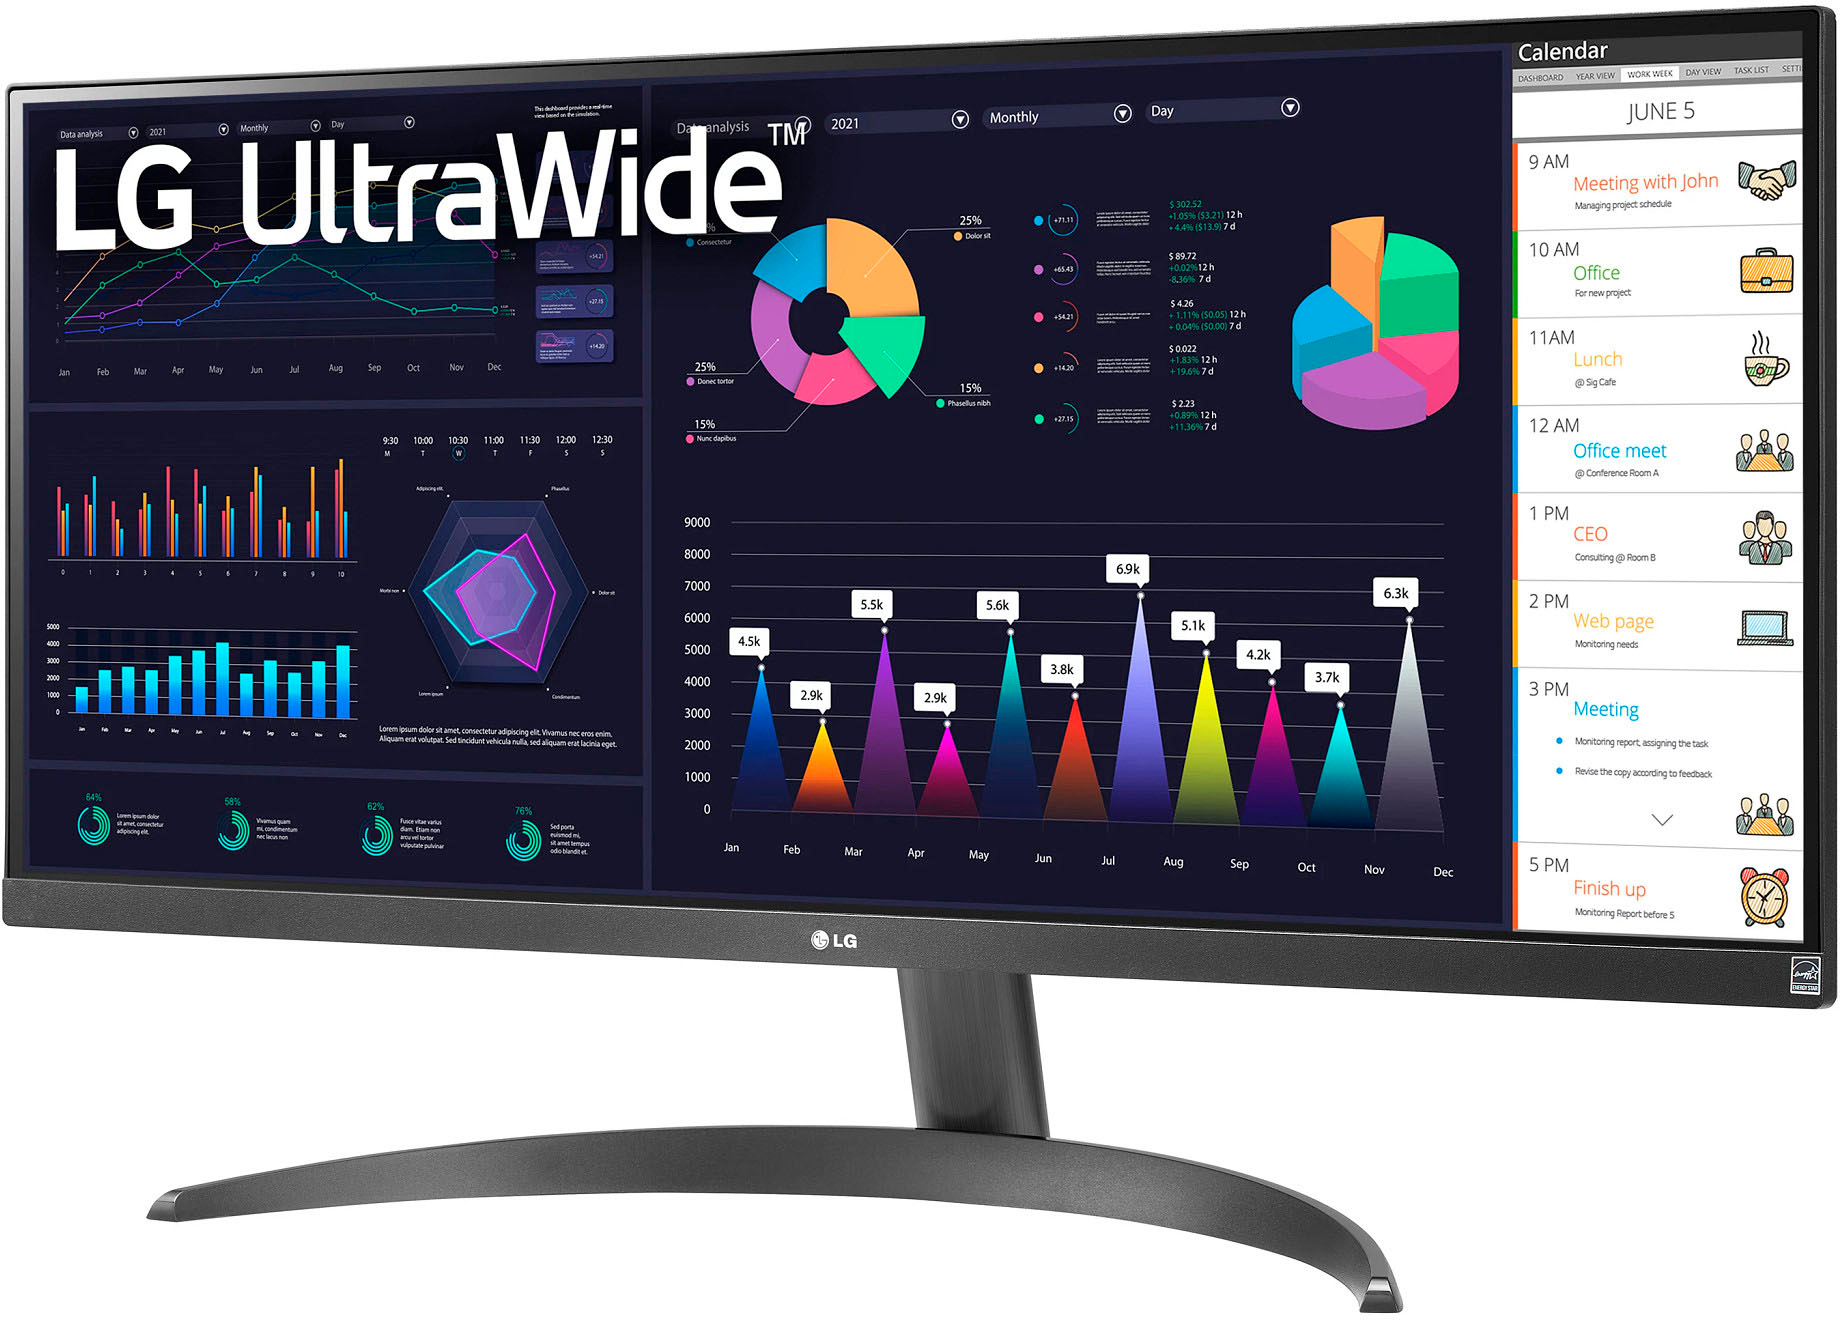 LG 29” IPS LED UltraWide FHD 100Hz AMD FreeSync Monitor with HDR